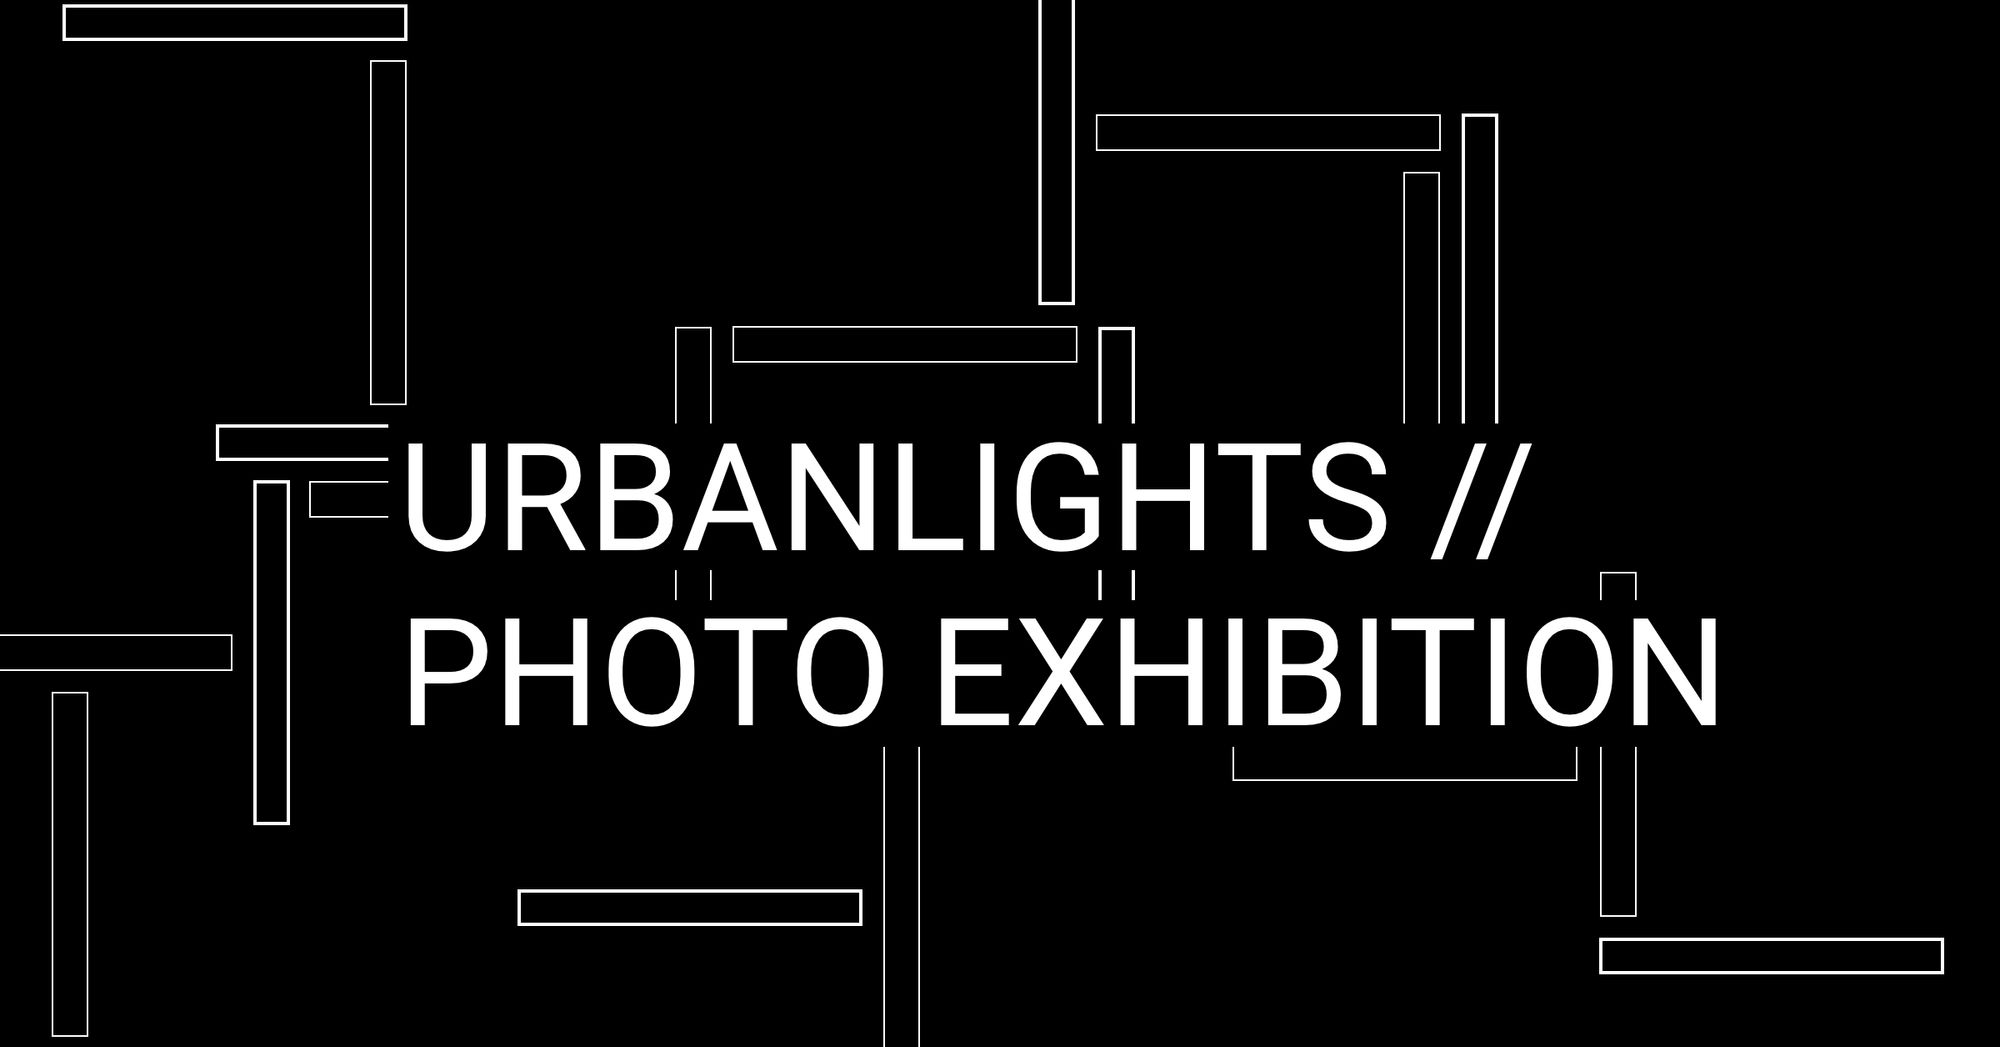 Photo exhibition moving into stops | URBANLIGHTS